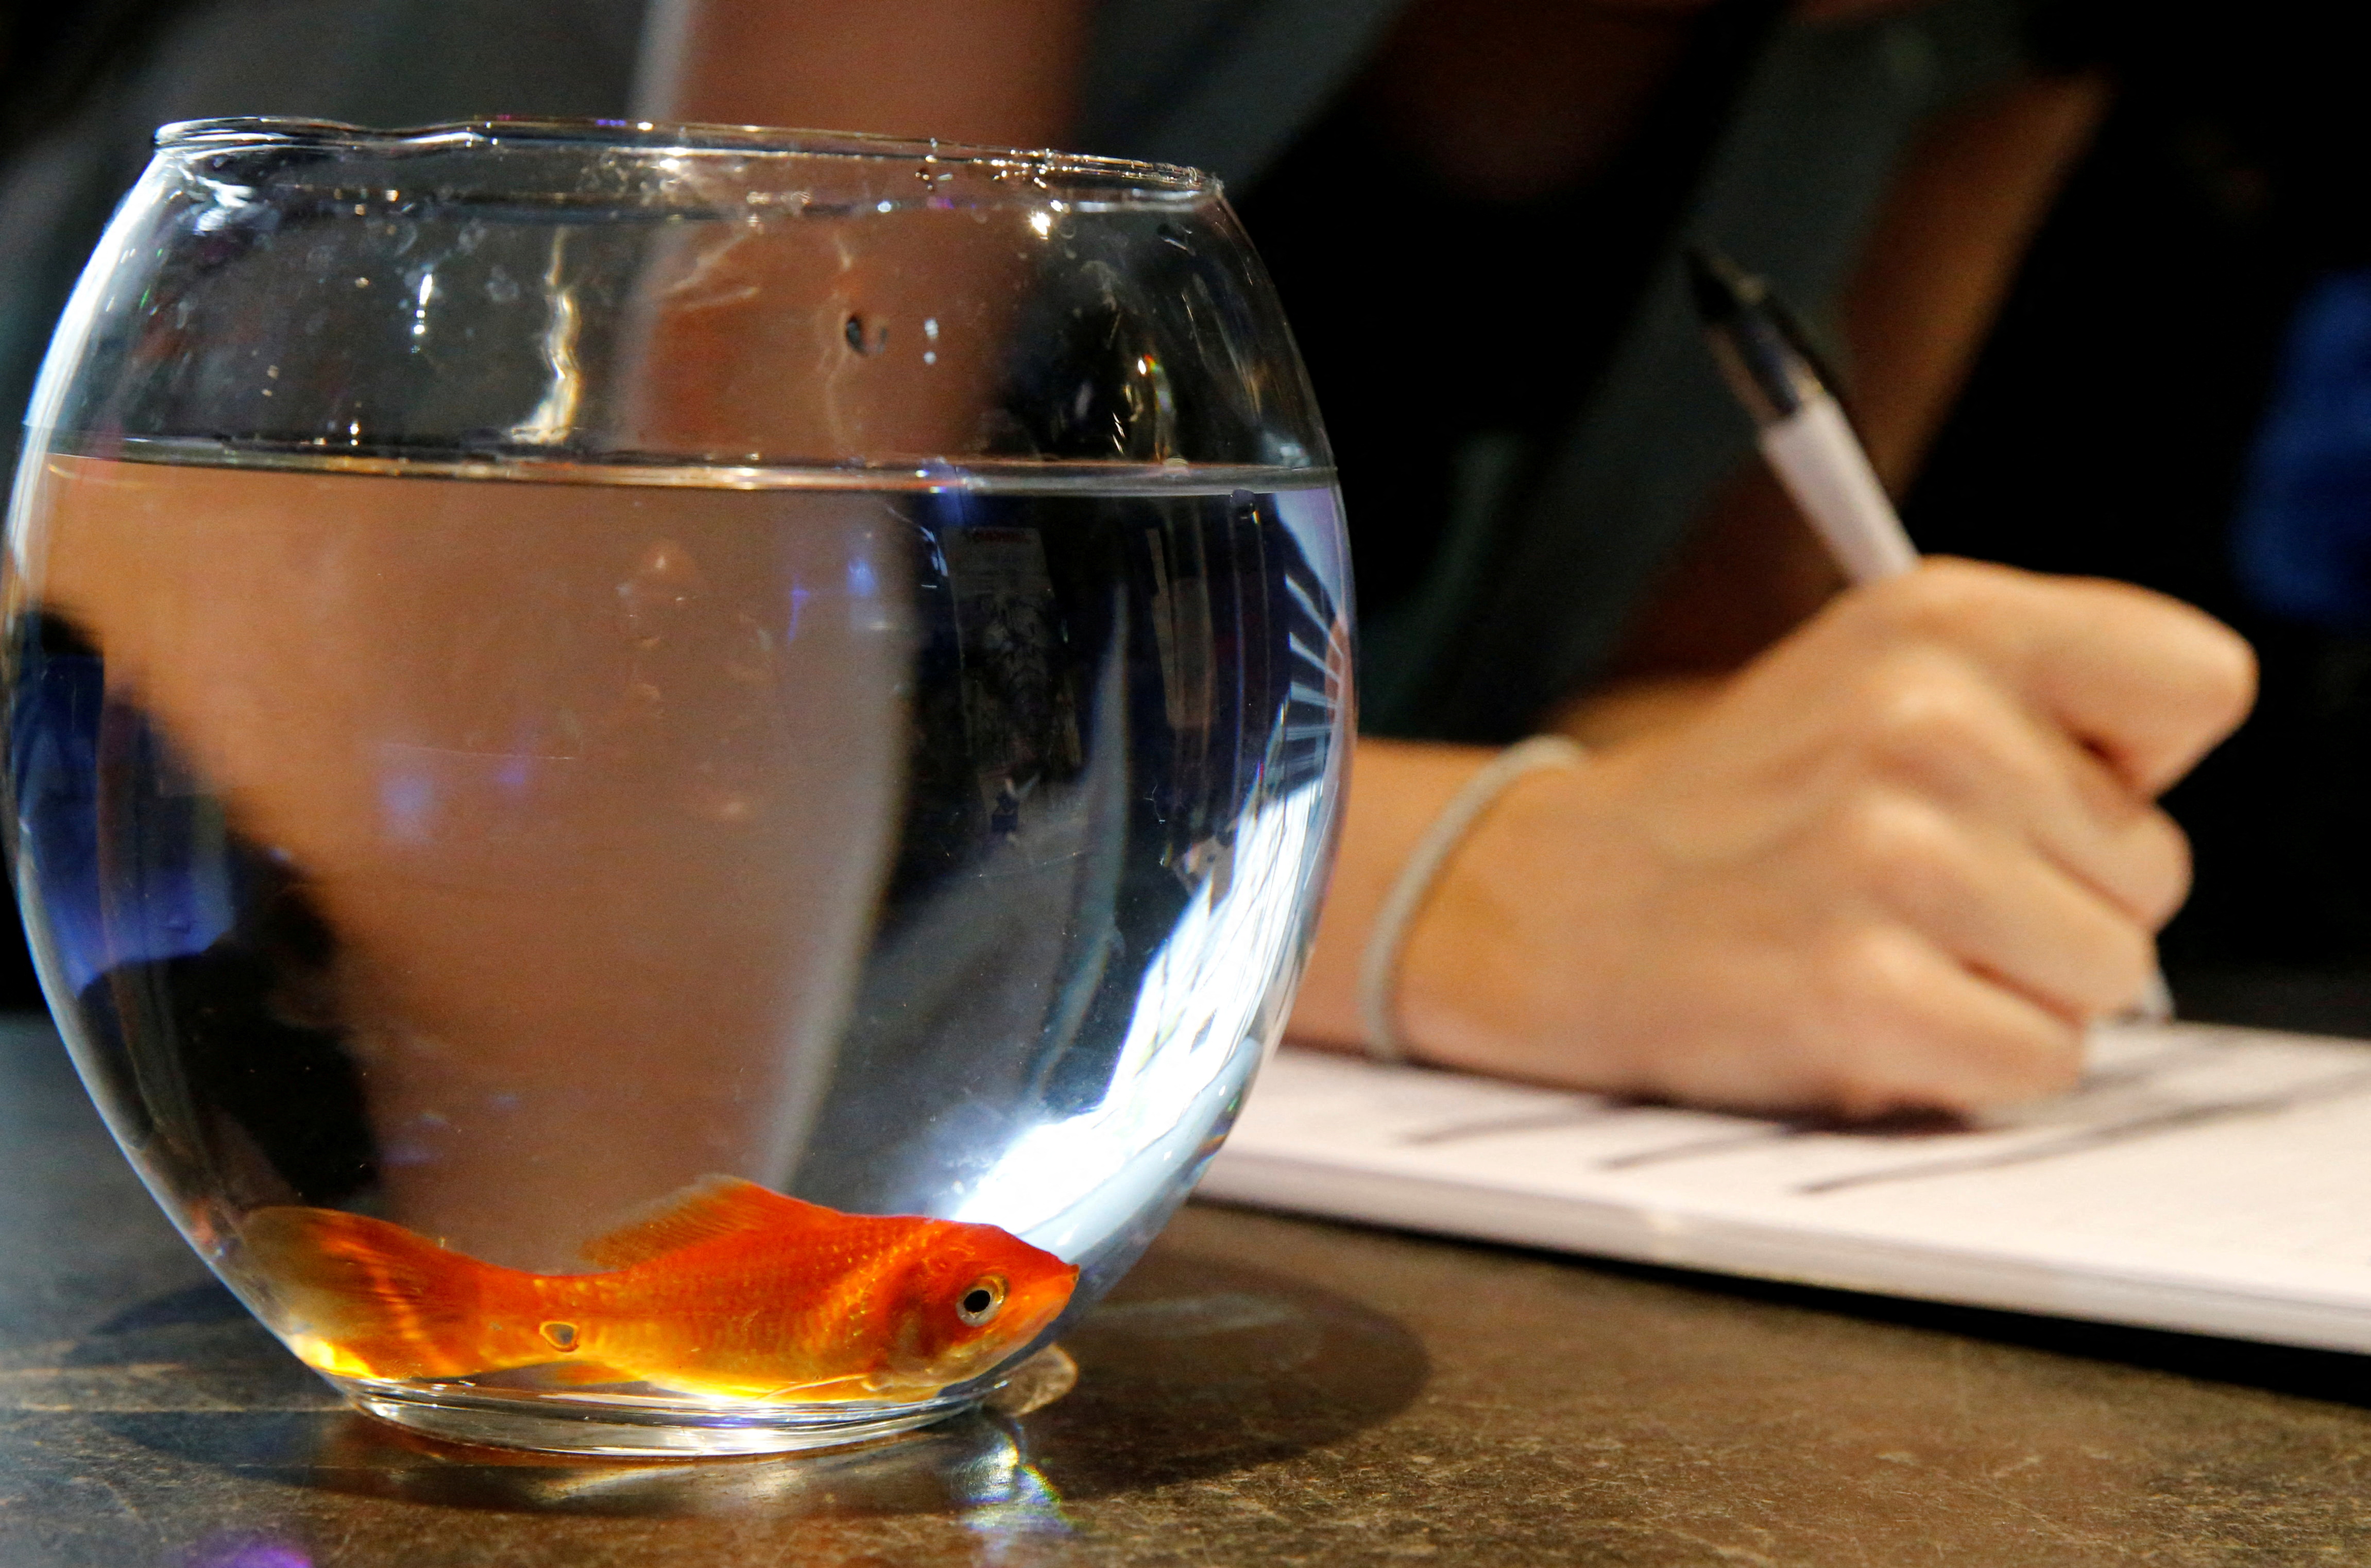 Emie Le Fouest from Paris brings her goldfish named "Luiz Pablo" to Paris aquarium as part of an operation launched to take care of hundreds of goldfish abandoned by French holiday-makers, in Paris